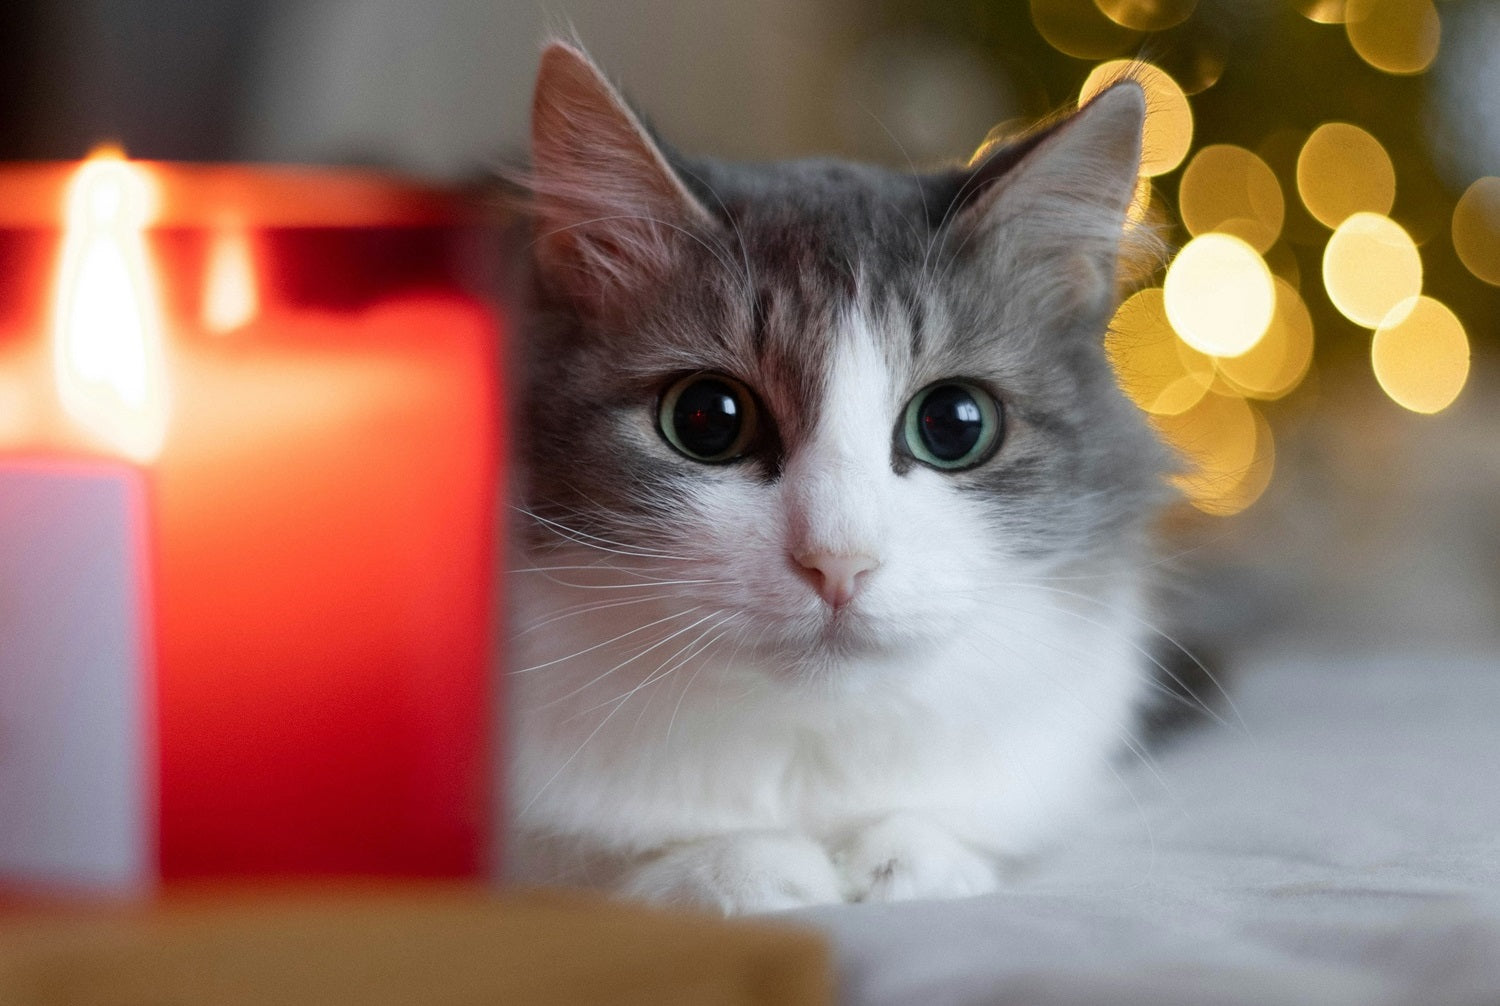 Are candles bad for cats?